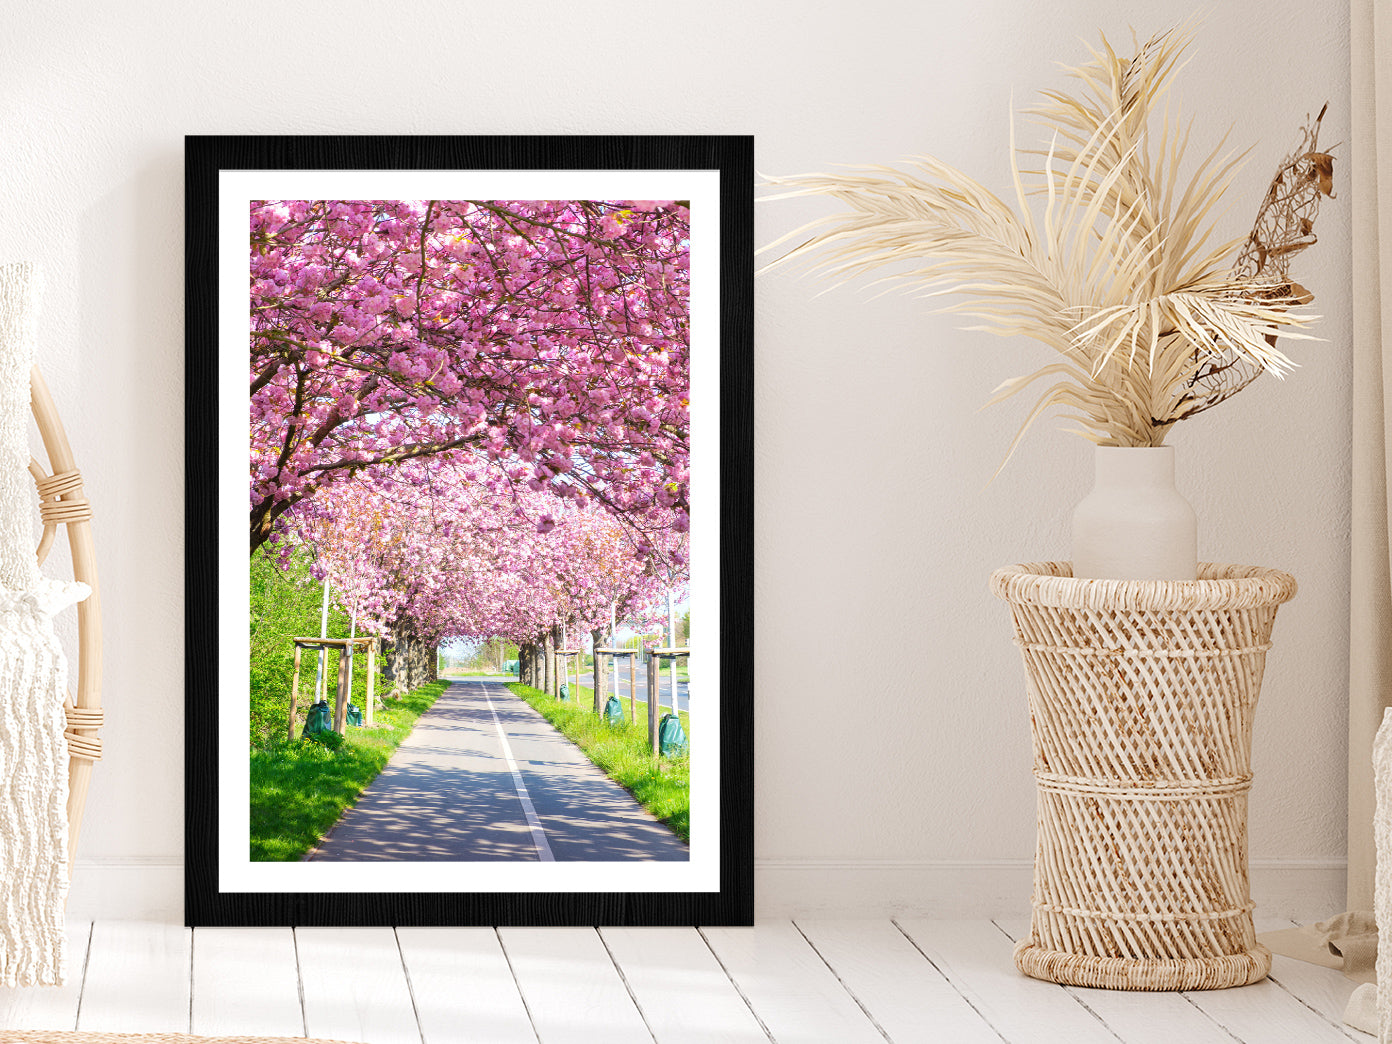 Blooming Pink Cherry Trees Spring Glass Framed Wall Art, Ready to Hang Quality Print With White Border Black